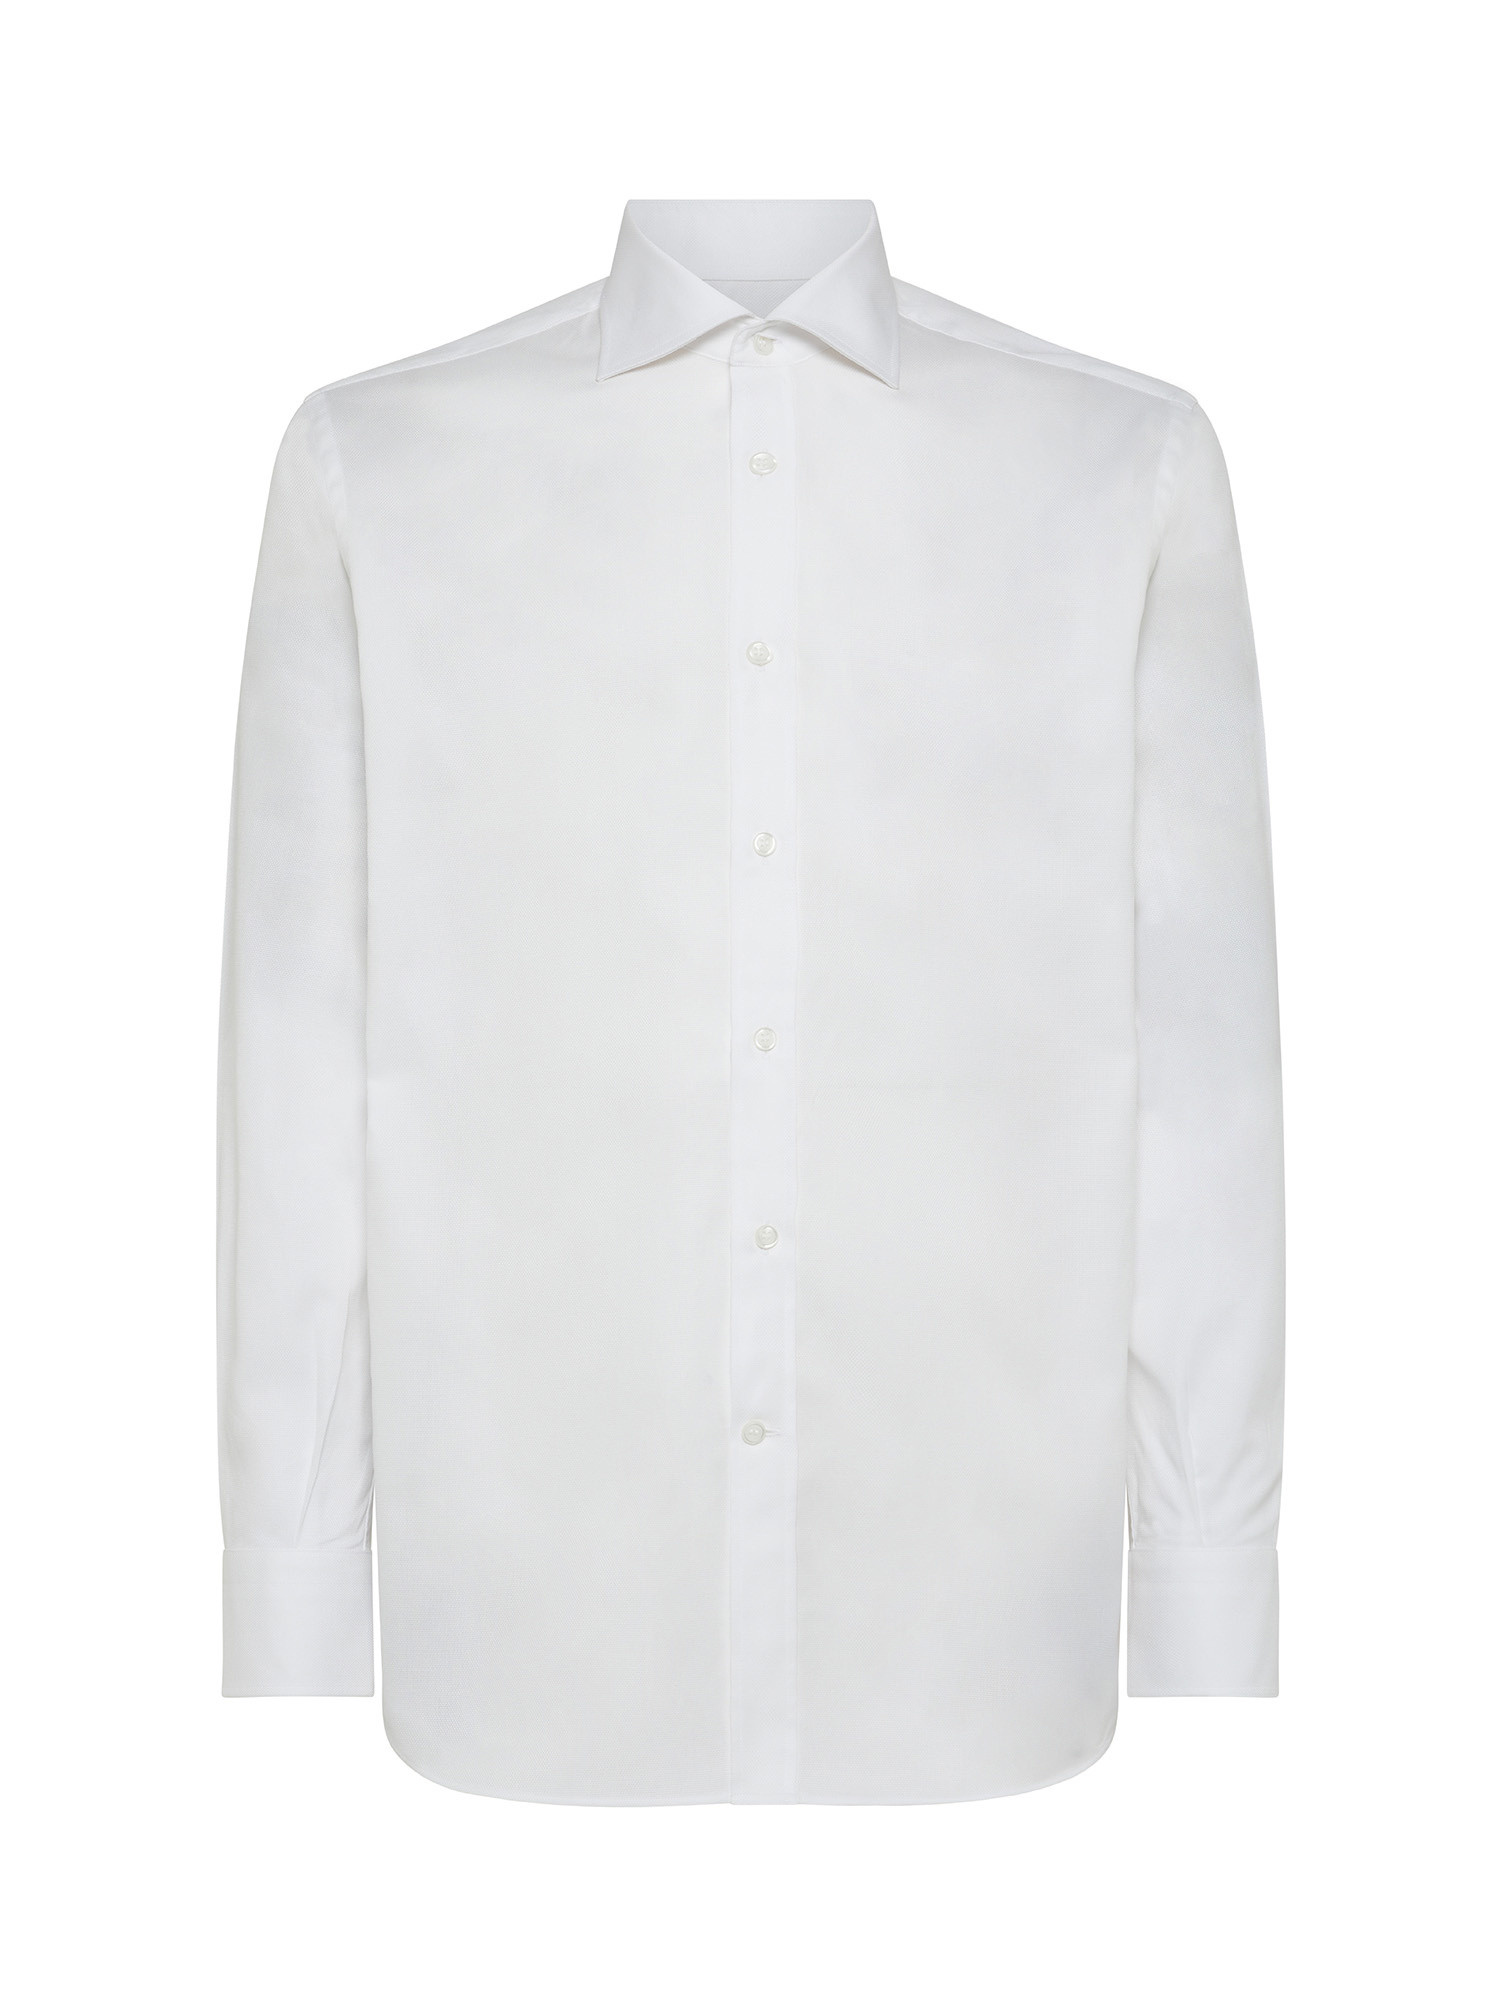 Luca D'Altieri - Regular fit shirt in pure cotton, White, large image number 0